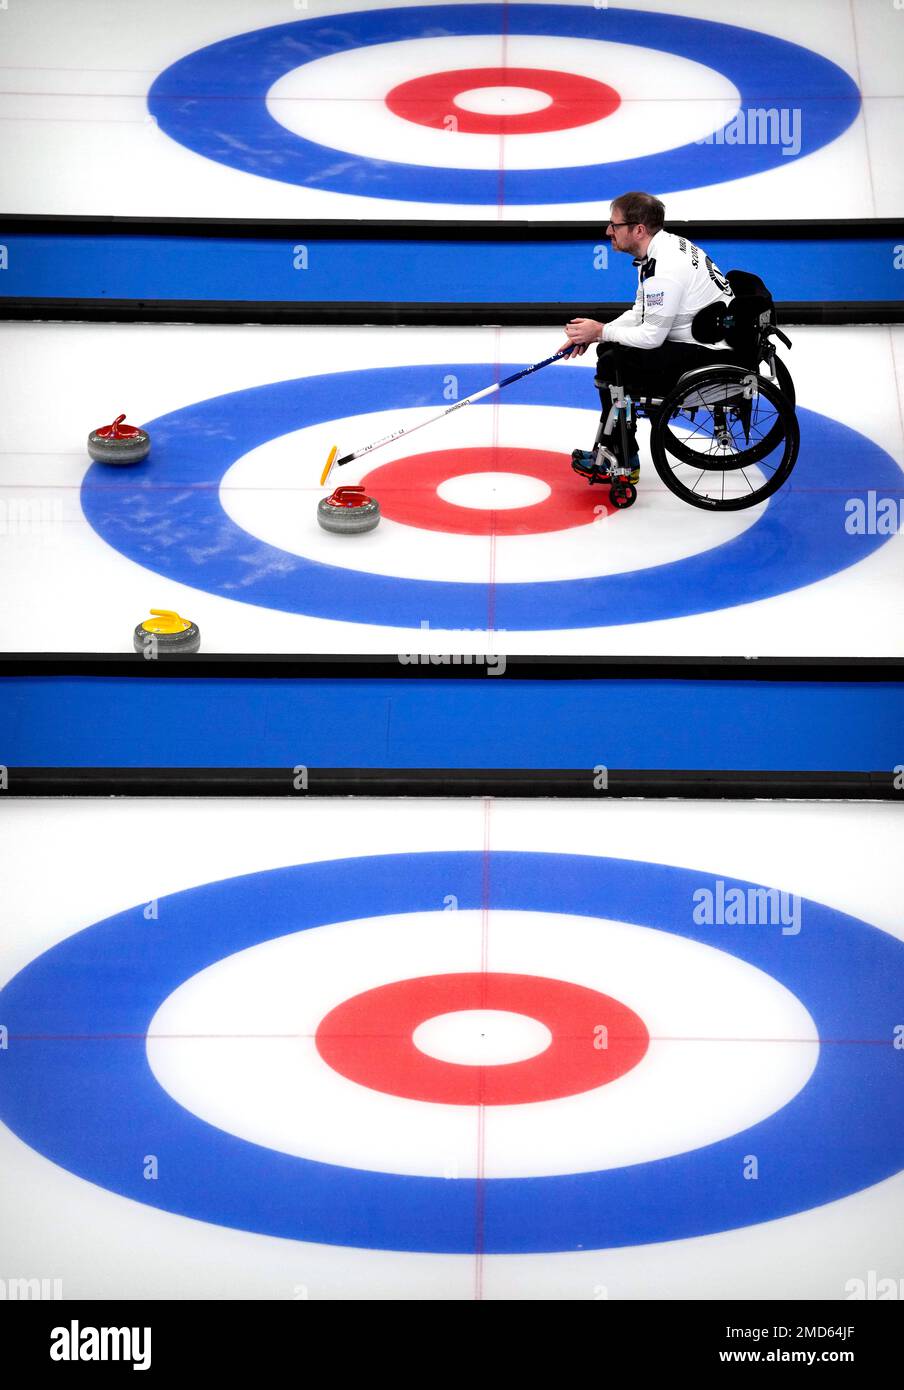 Hugh Nibloe of Scotland helps his team line up a throw during their semifinal match against Sweden at the World Wheelchair Curling Championship, a test event for the 2022 Winter Olympics, held